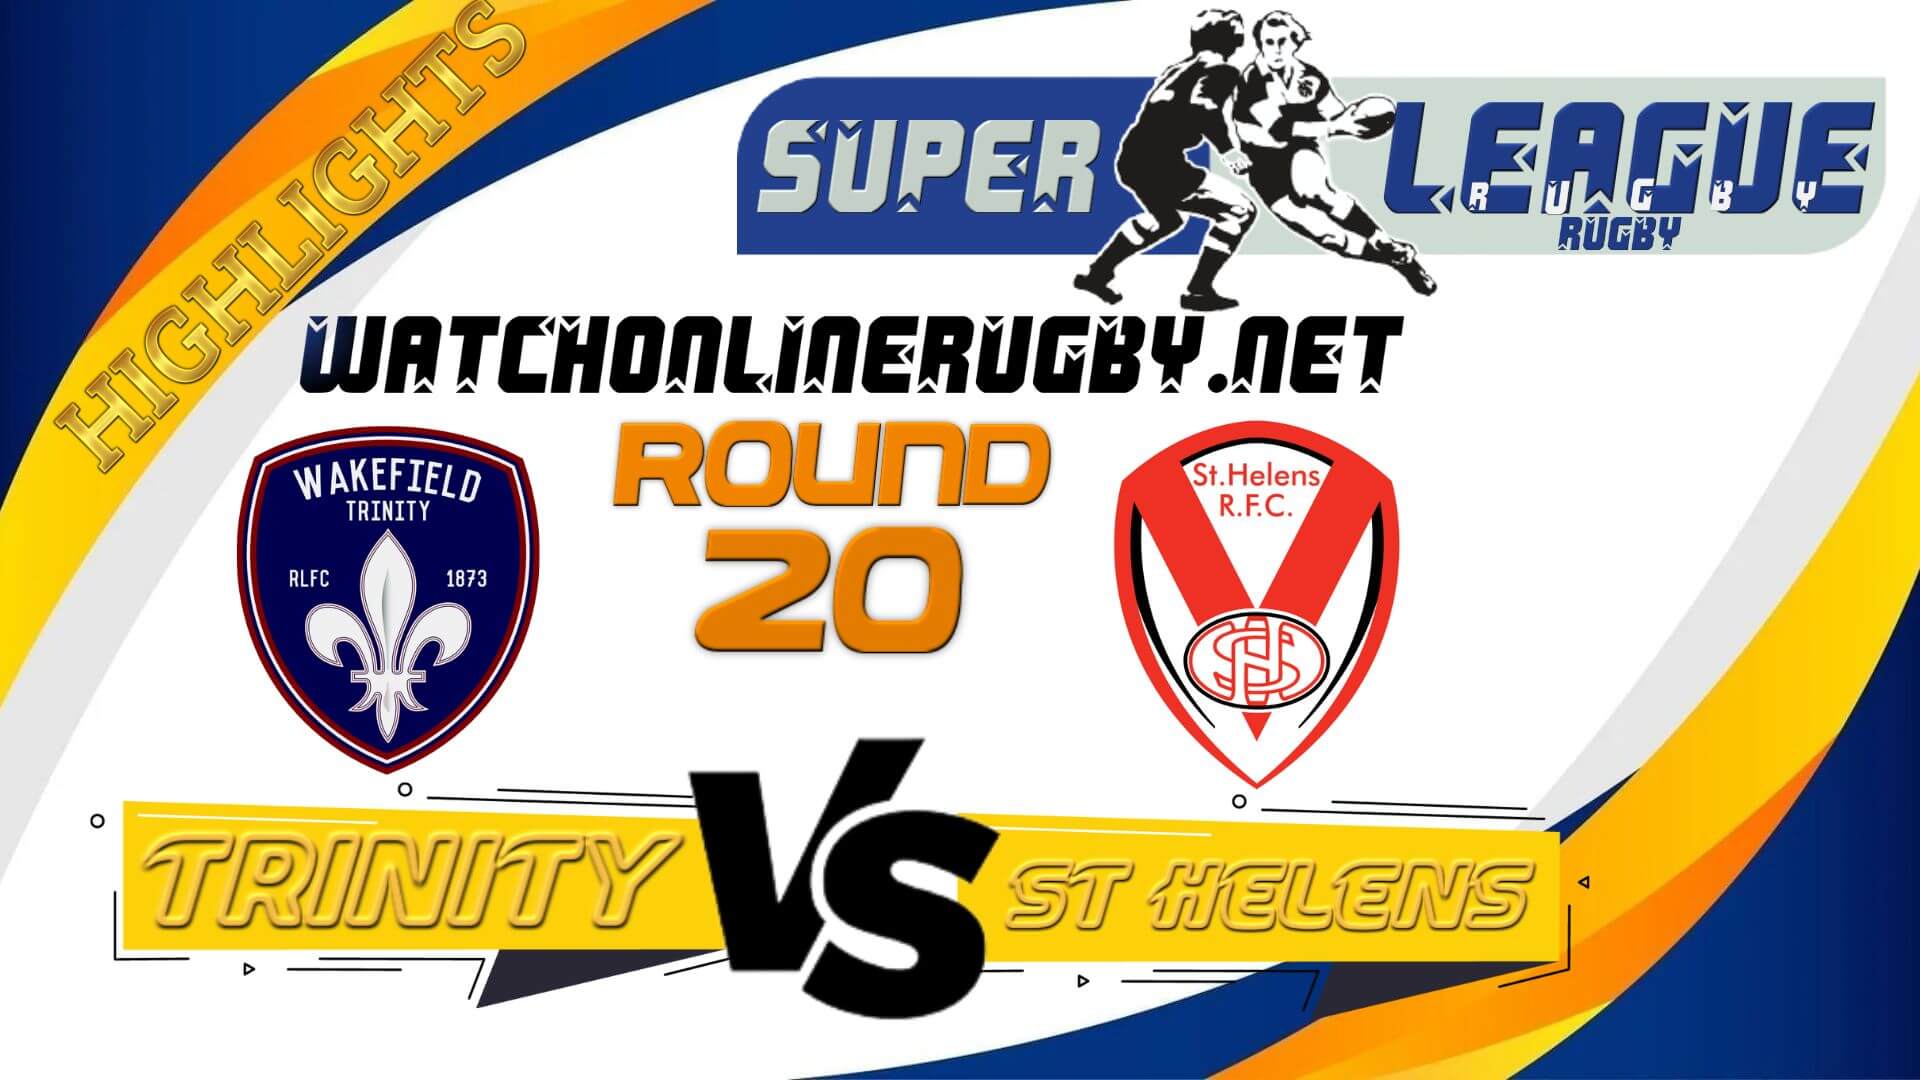 Wakefield Trinity Vs St Helens Super League Rugby 2022 RD 20